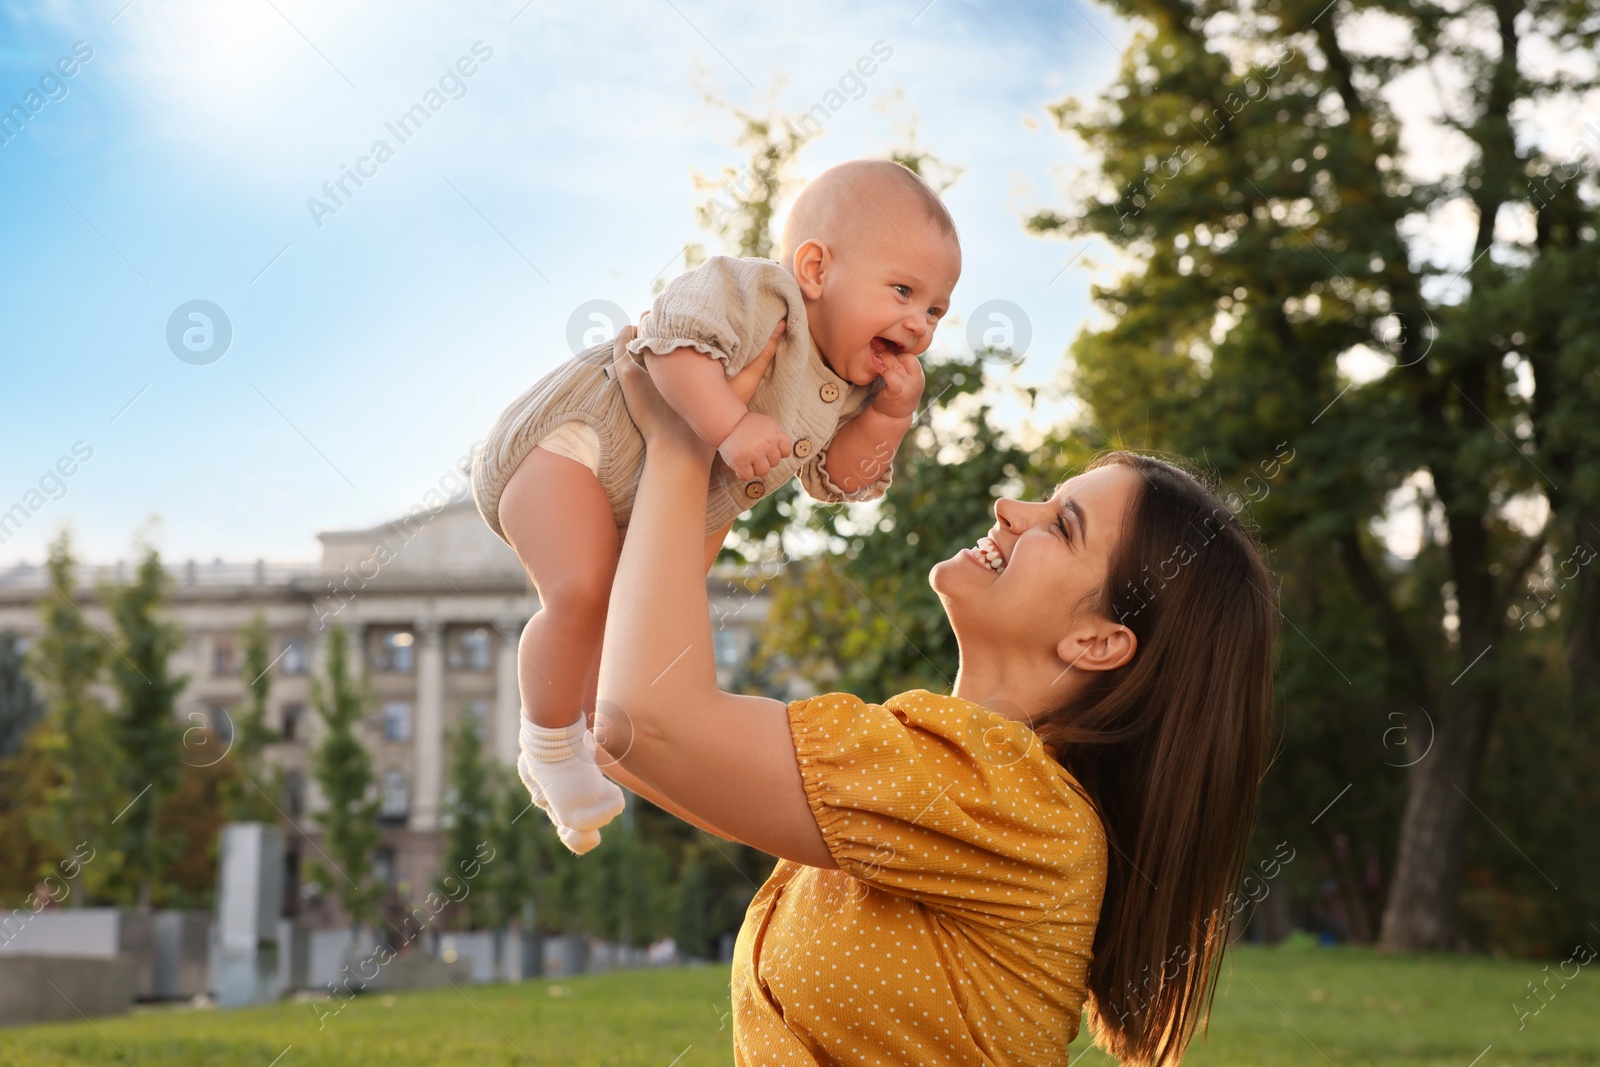 Photo of Happy mother with adorable baby walking in park on sunny day